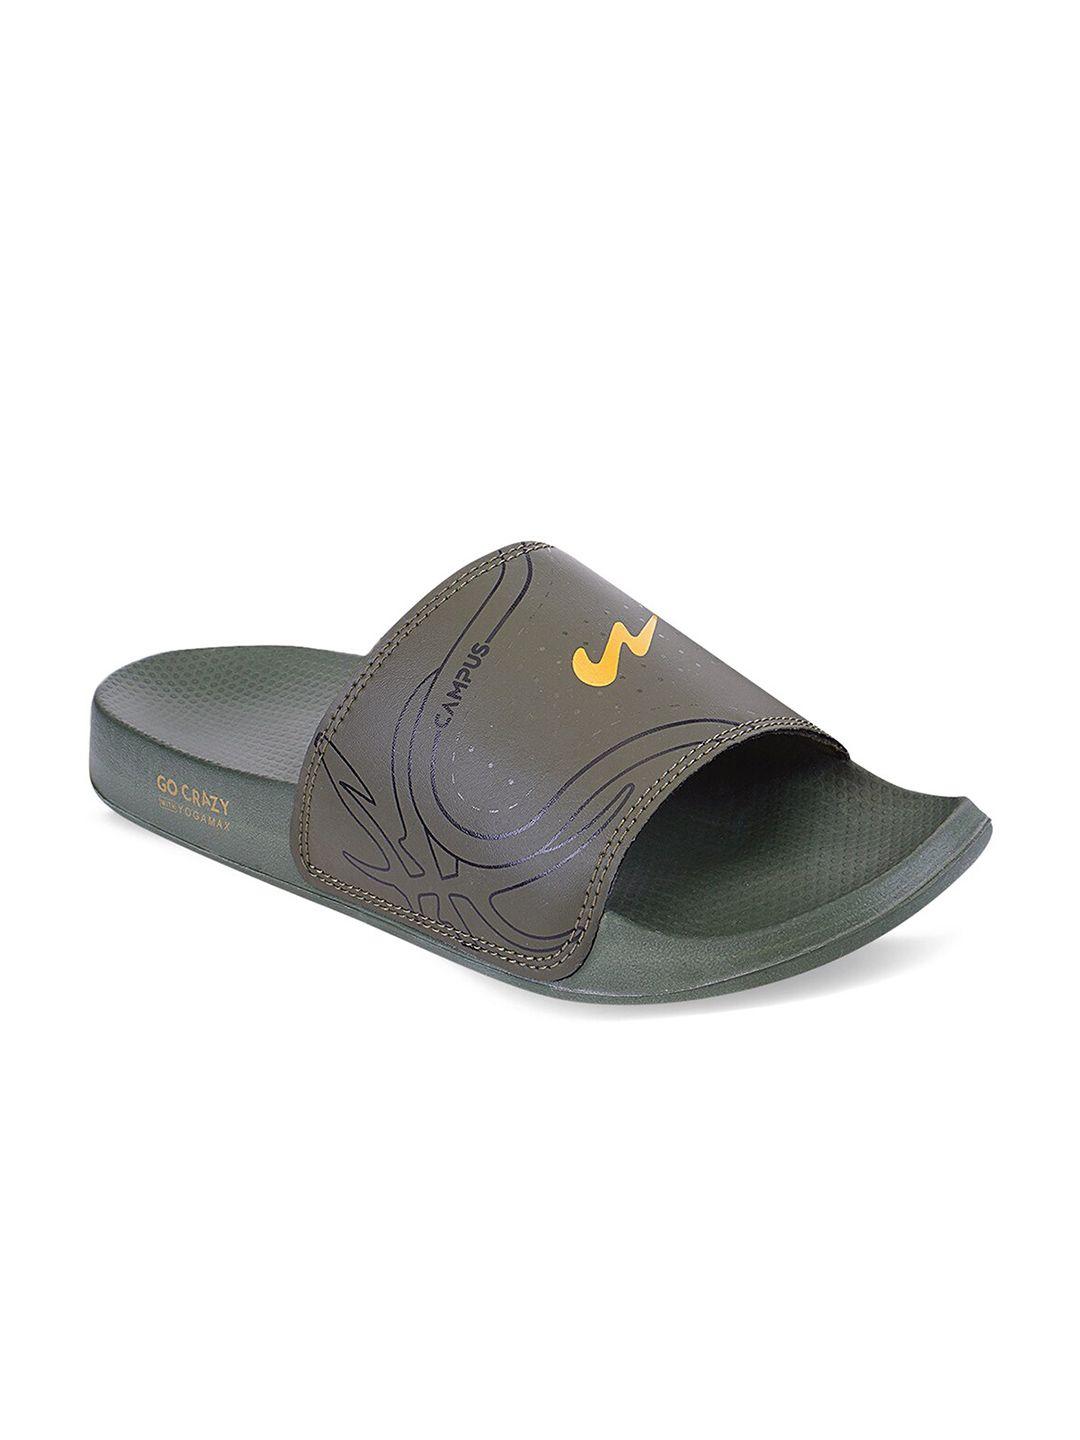 campus men olive green & yellow printed sliders